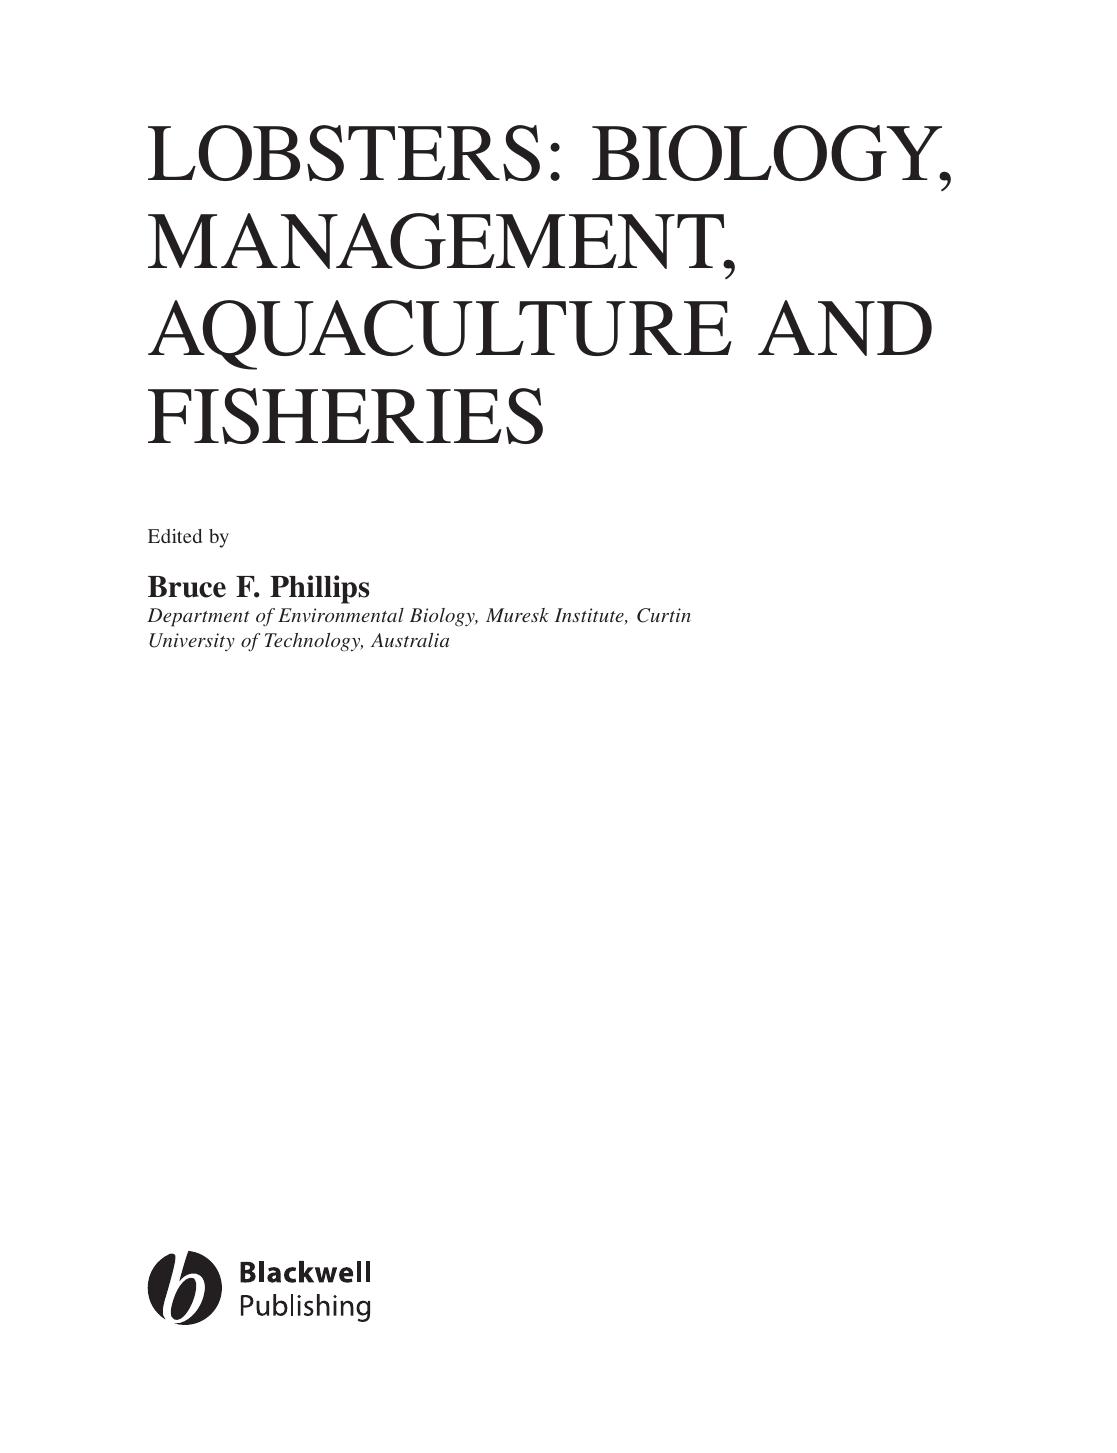 Lobsters Biology Management Aquaculture and Fisheries-Wiley-Blackwell (2006)